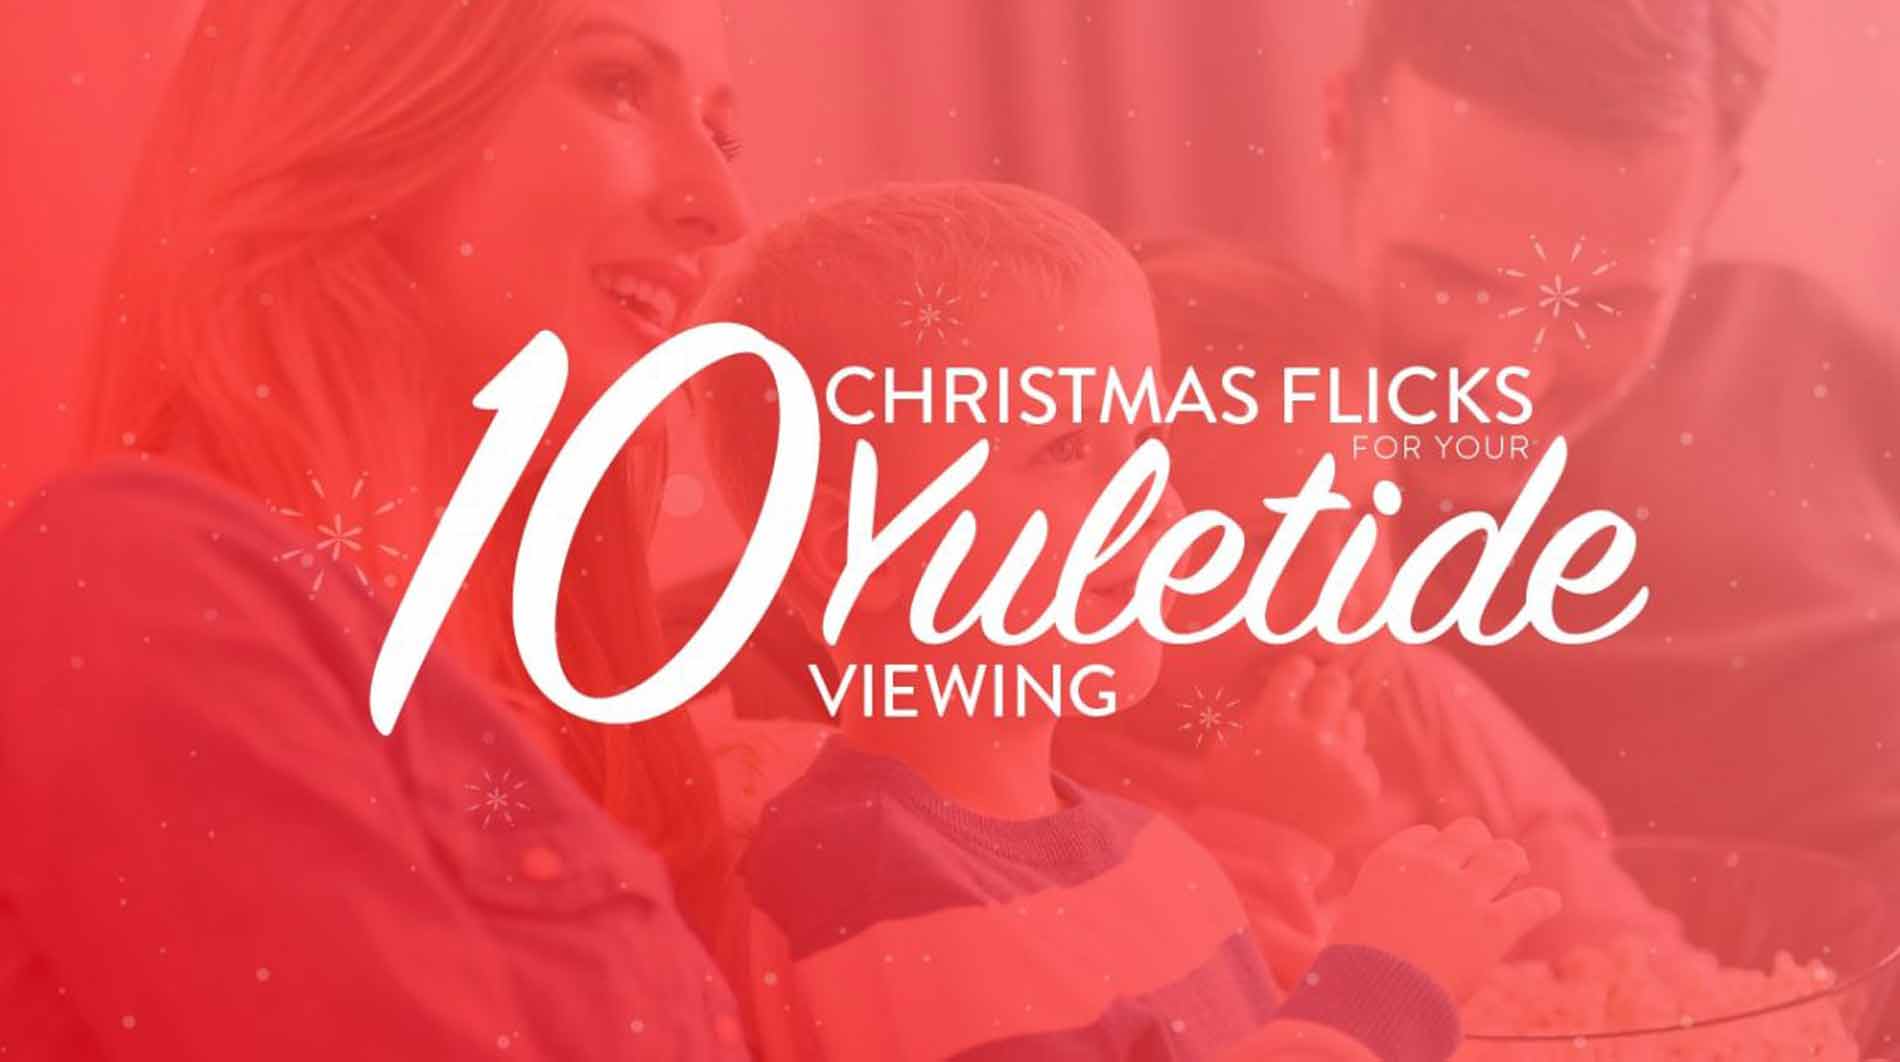 10 Christmas Flicks For Your Yuletide Viewing